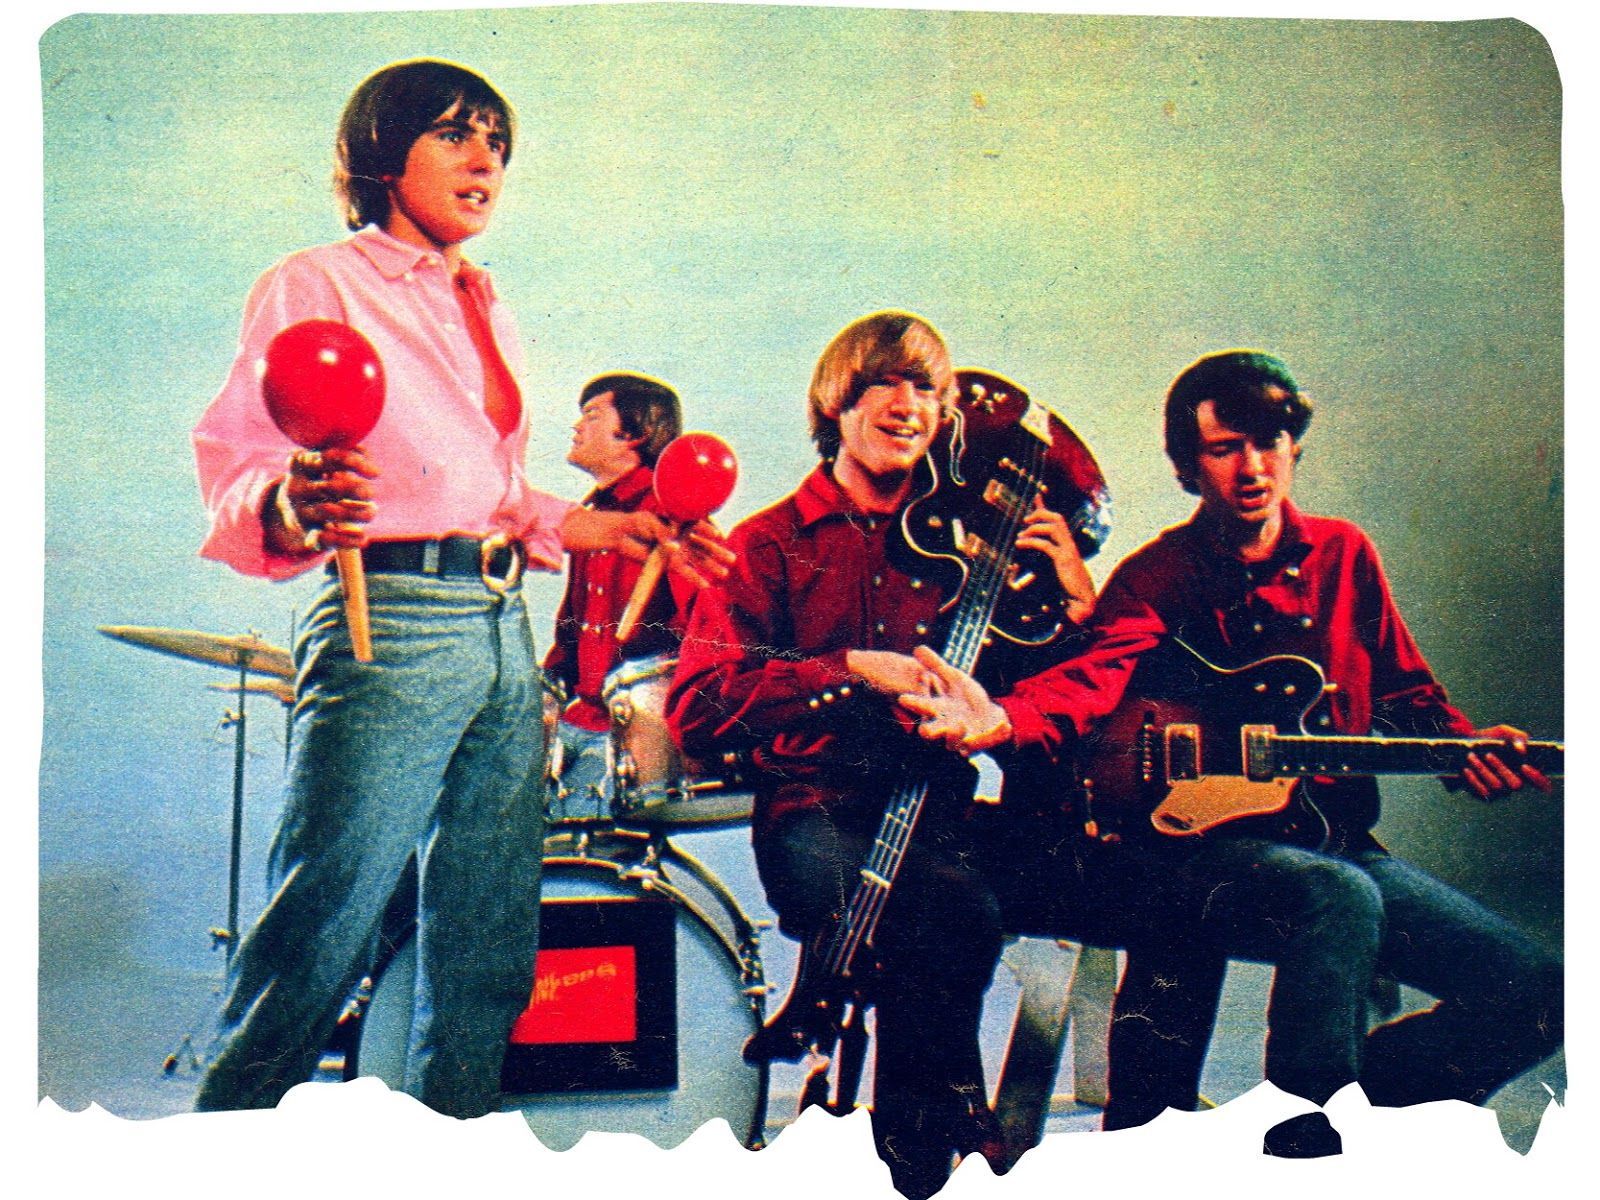 The Monkees, Micky Dolenz, Davy Jones, Mike Nesmith, Peter Tork. The monkees, Michael nesmith, Davy jones